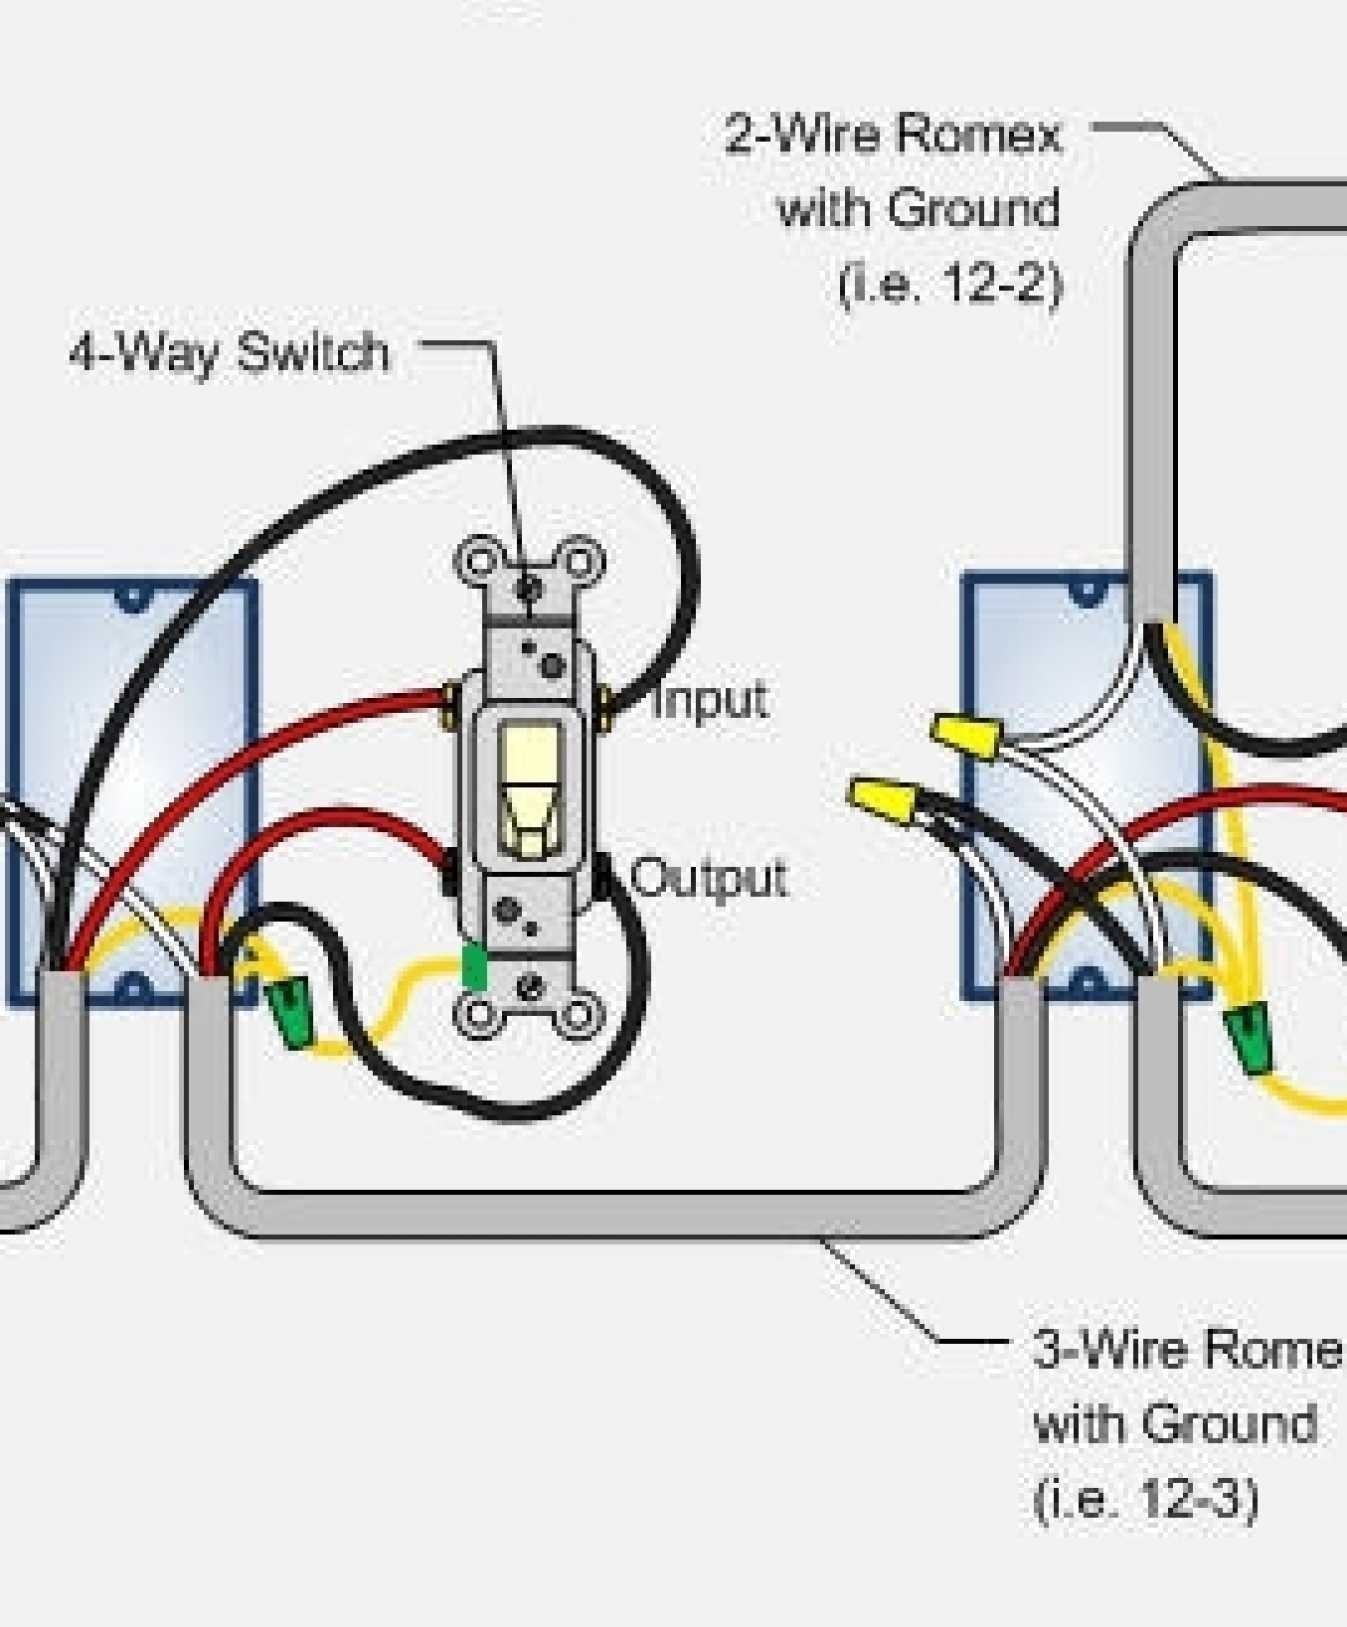 Wiring Diagram 3 Way Switch Multiple Fixtures Fresh Wiring Diagram for 3 Way Switch Two Lights